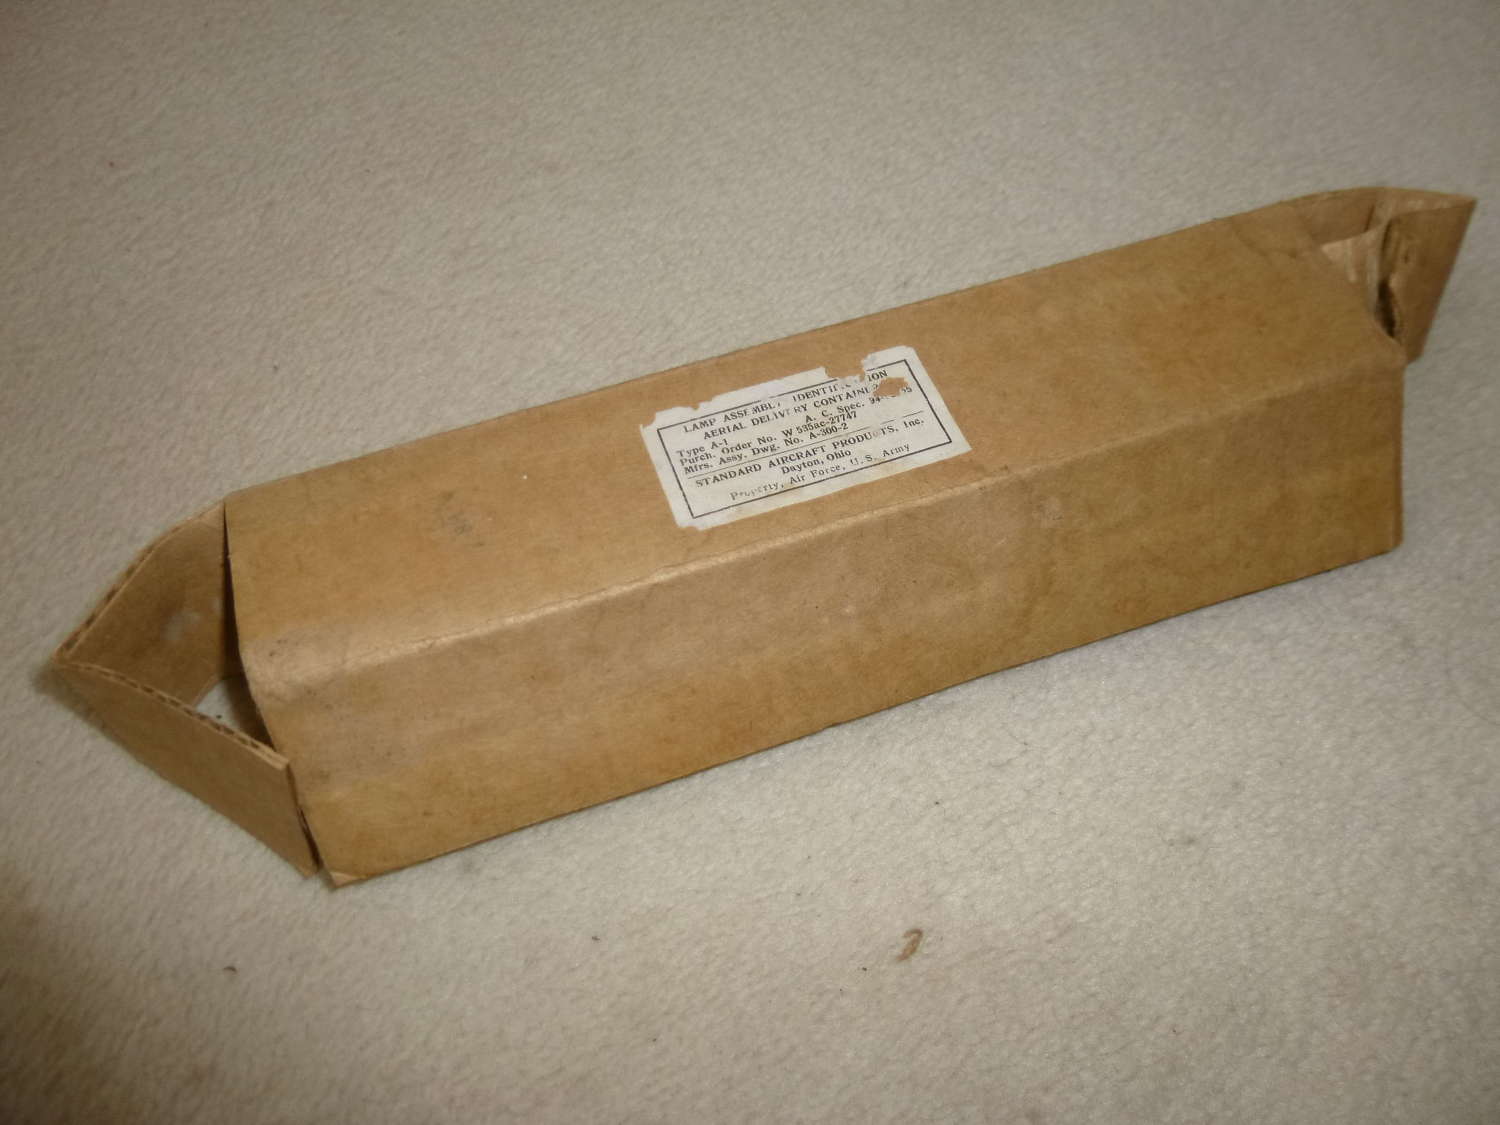 US Army empty cardboard for drop container light